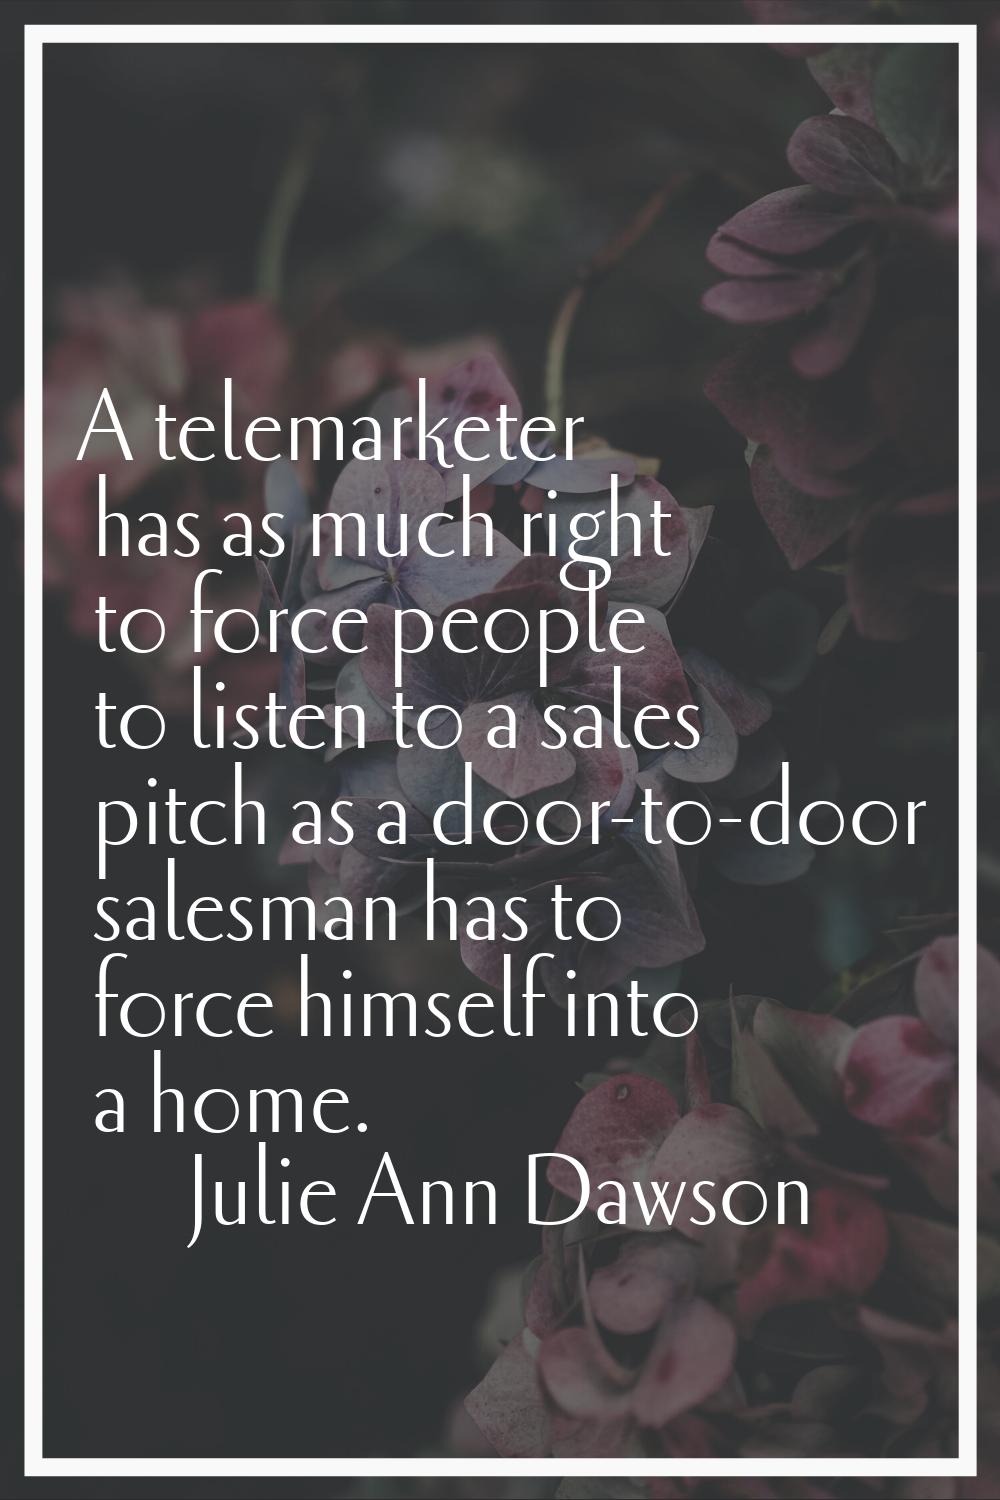 A telemarketer has as much right to force people to listen to a sales pitch as a door-to-door sales